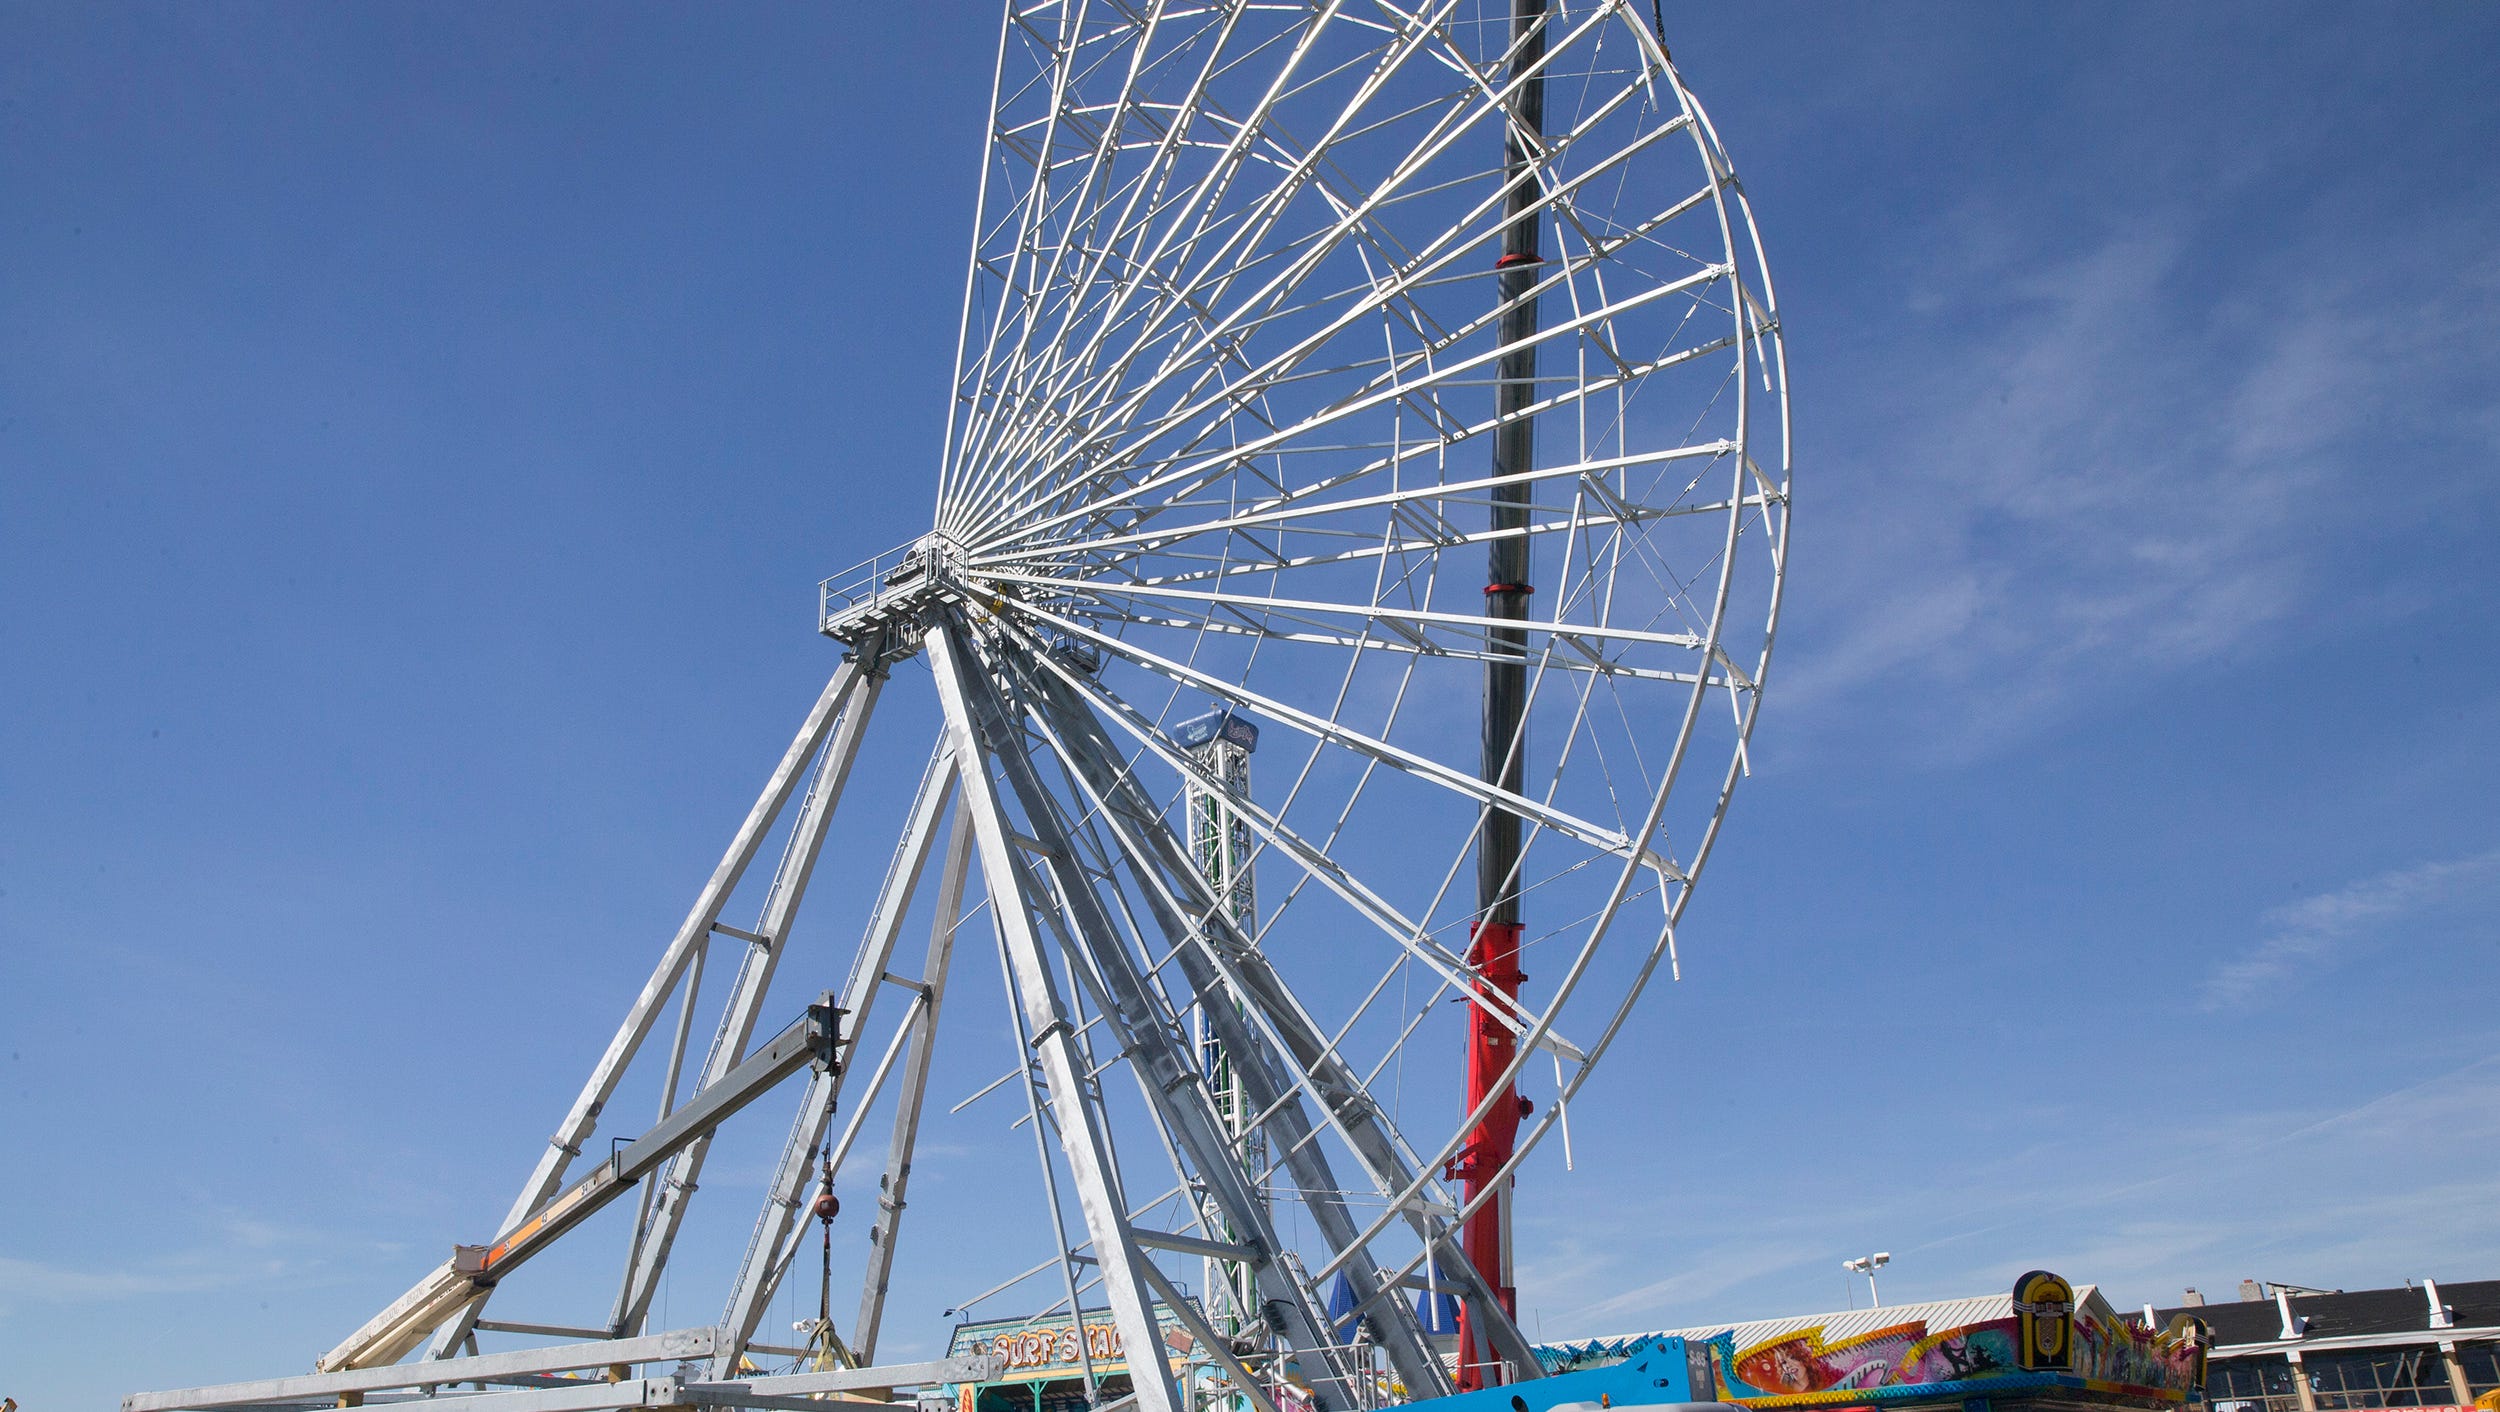 New rides coming to Seaside Heights, nearly 5 years after Sandy